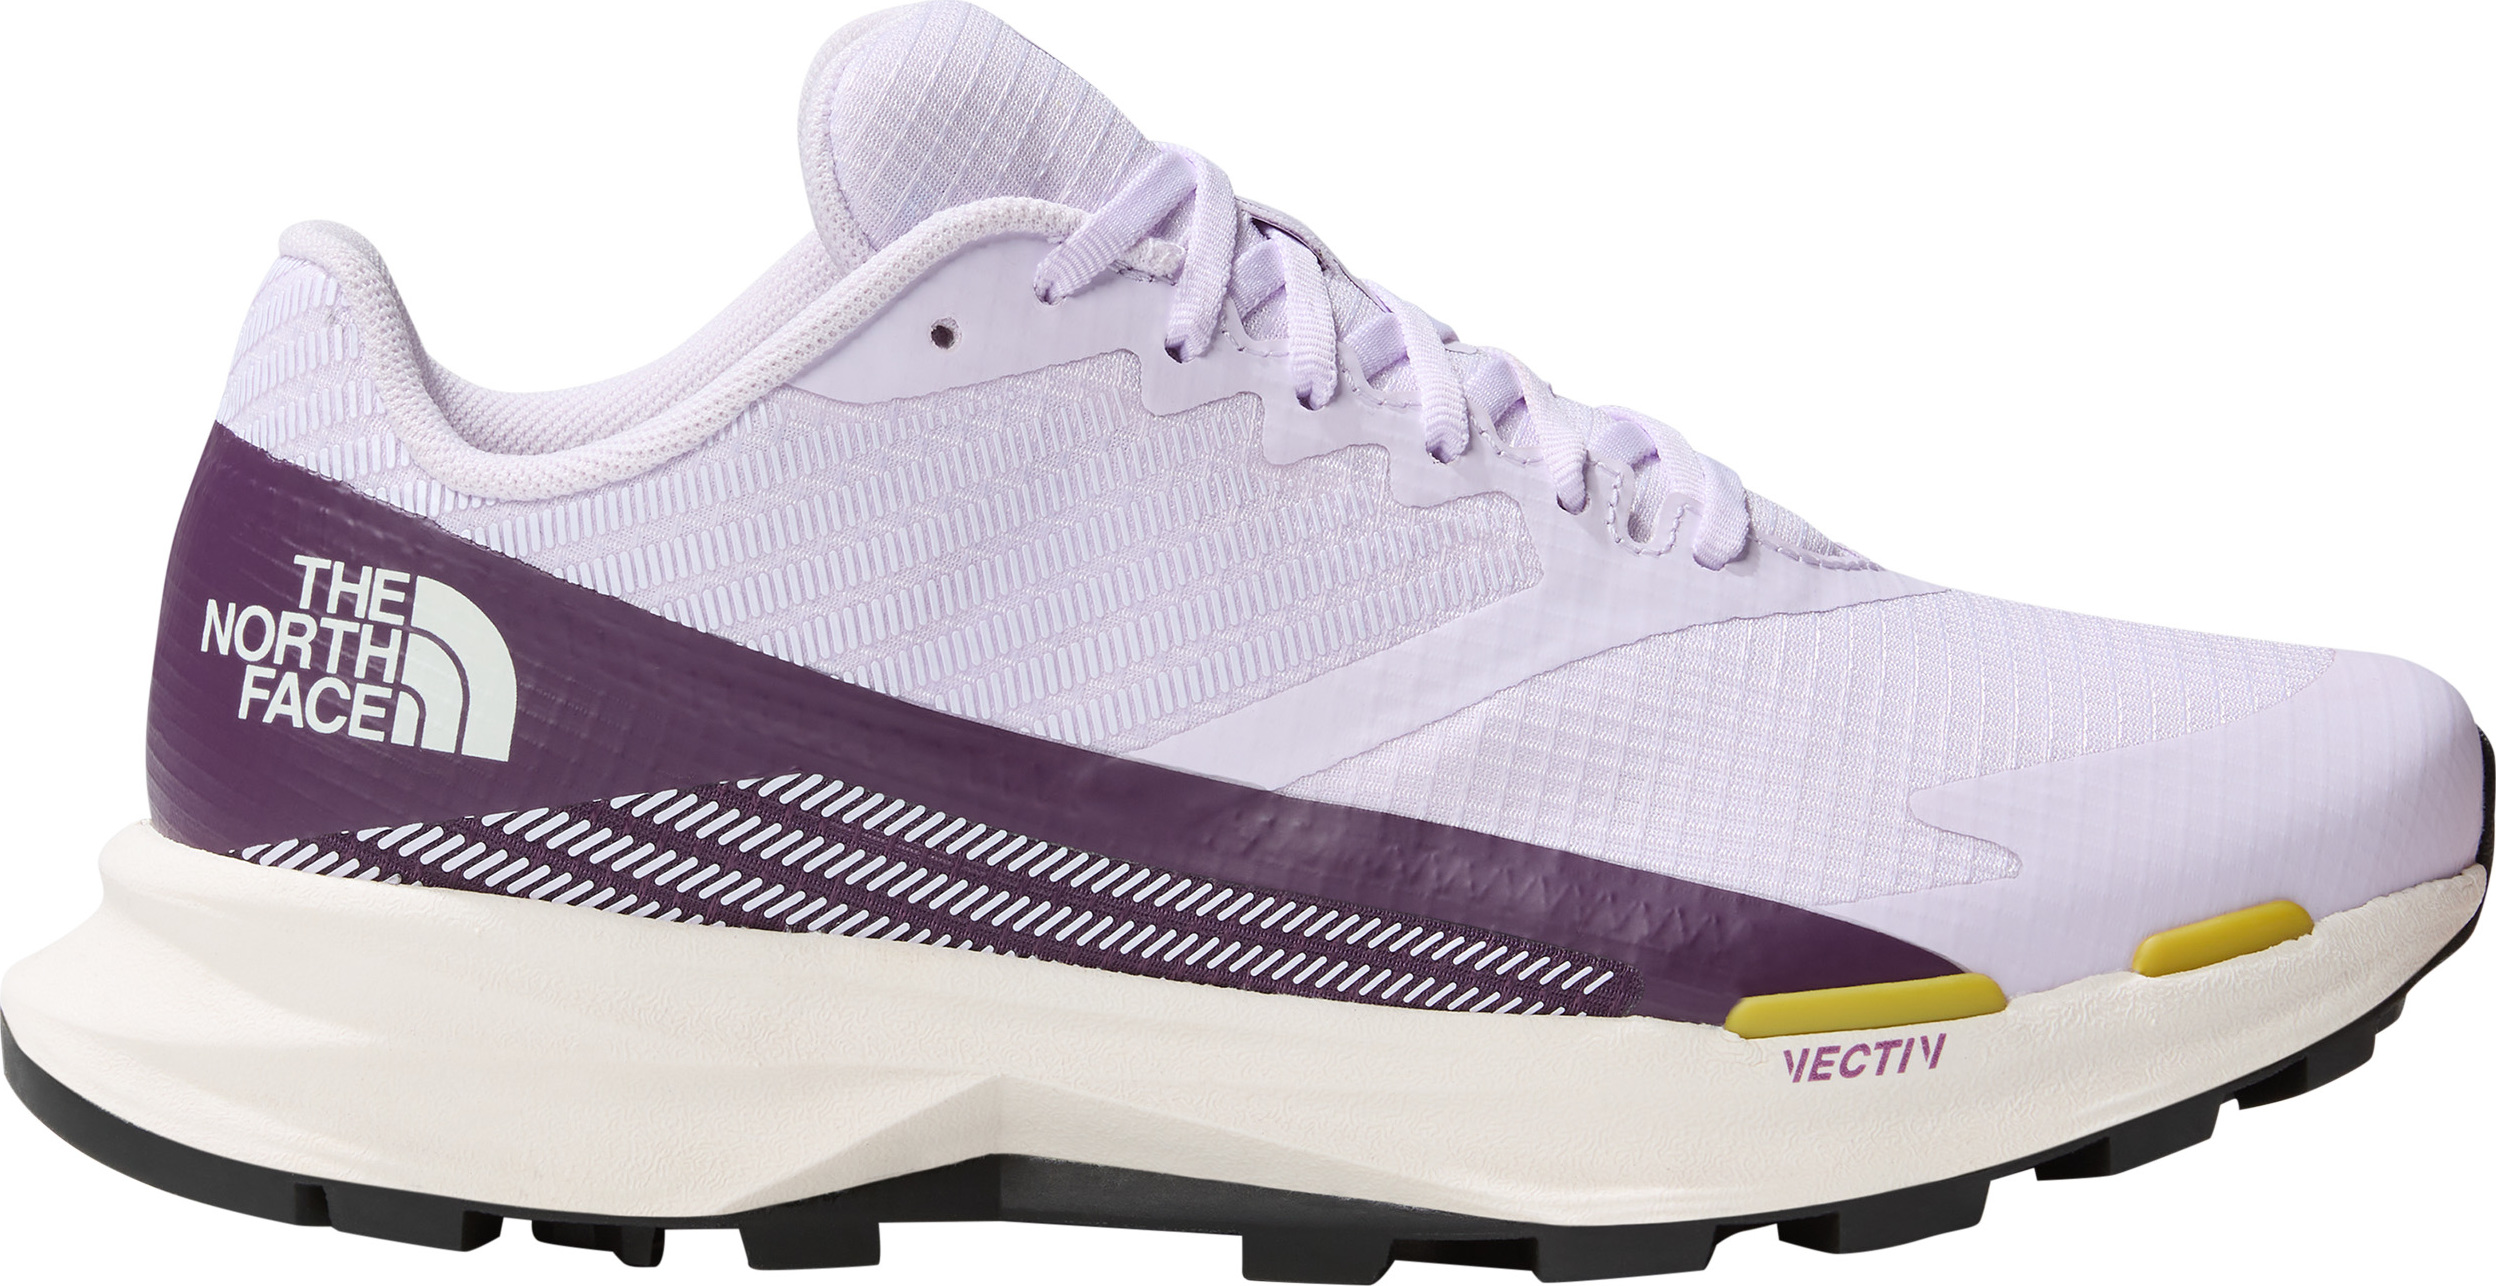 The North Face Women’s VECTIV Levitum Icy Lilac/Black Currant